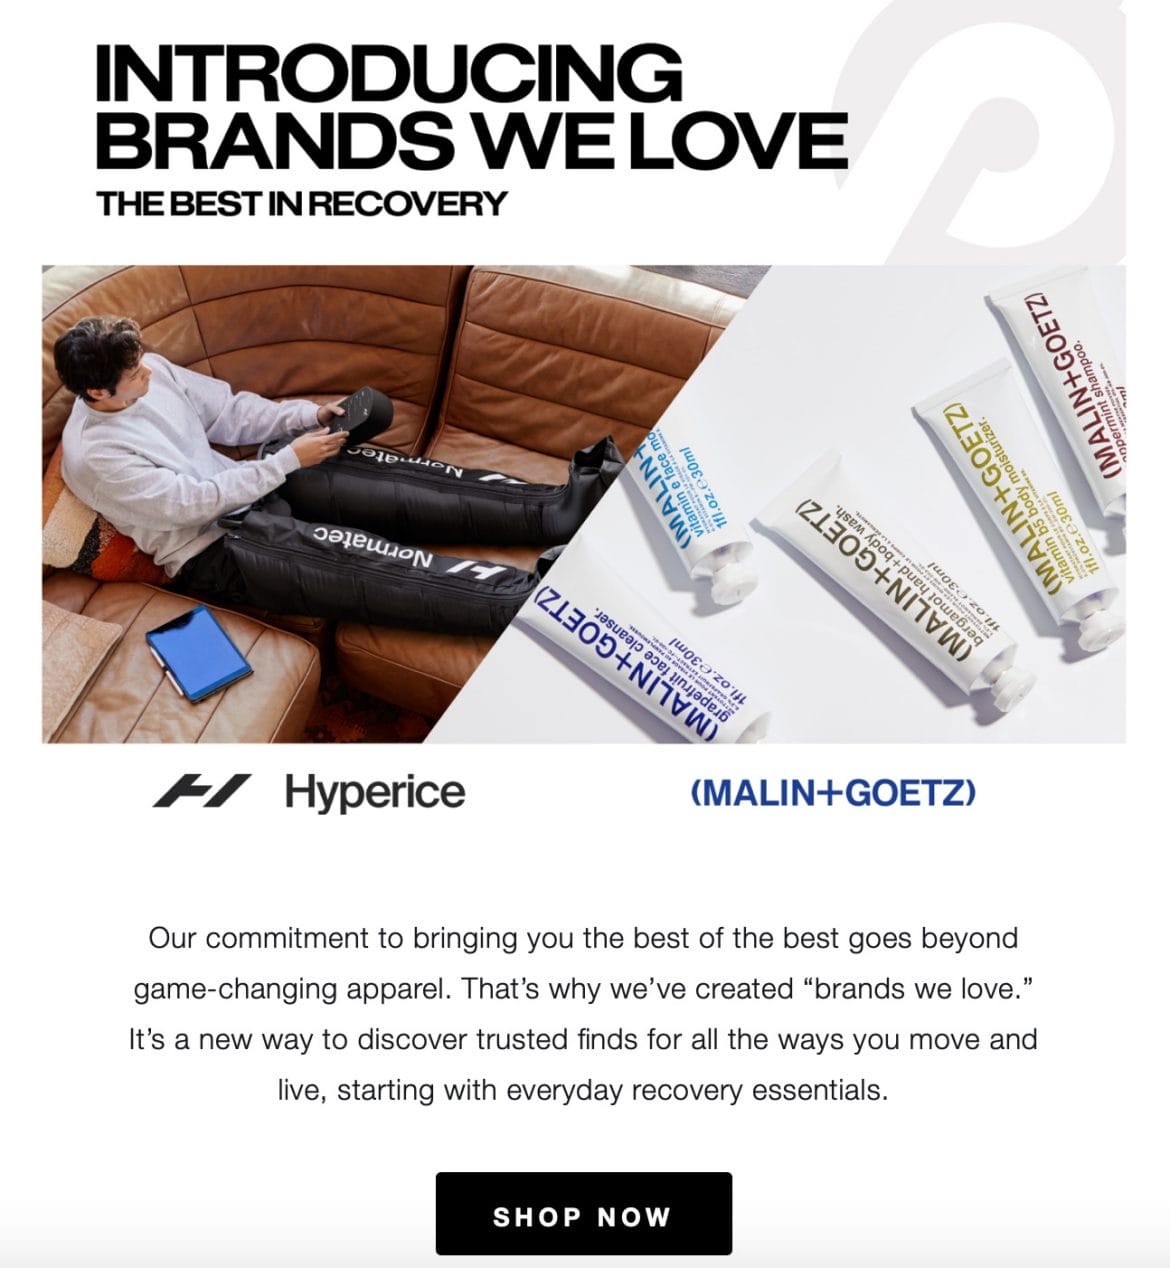 Peloton email to members about new "Brands We Love" page.